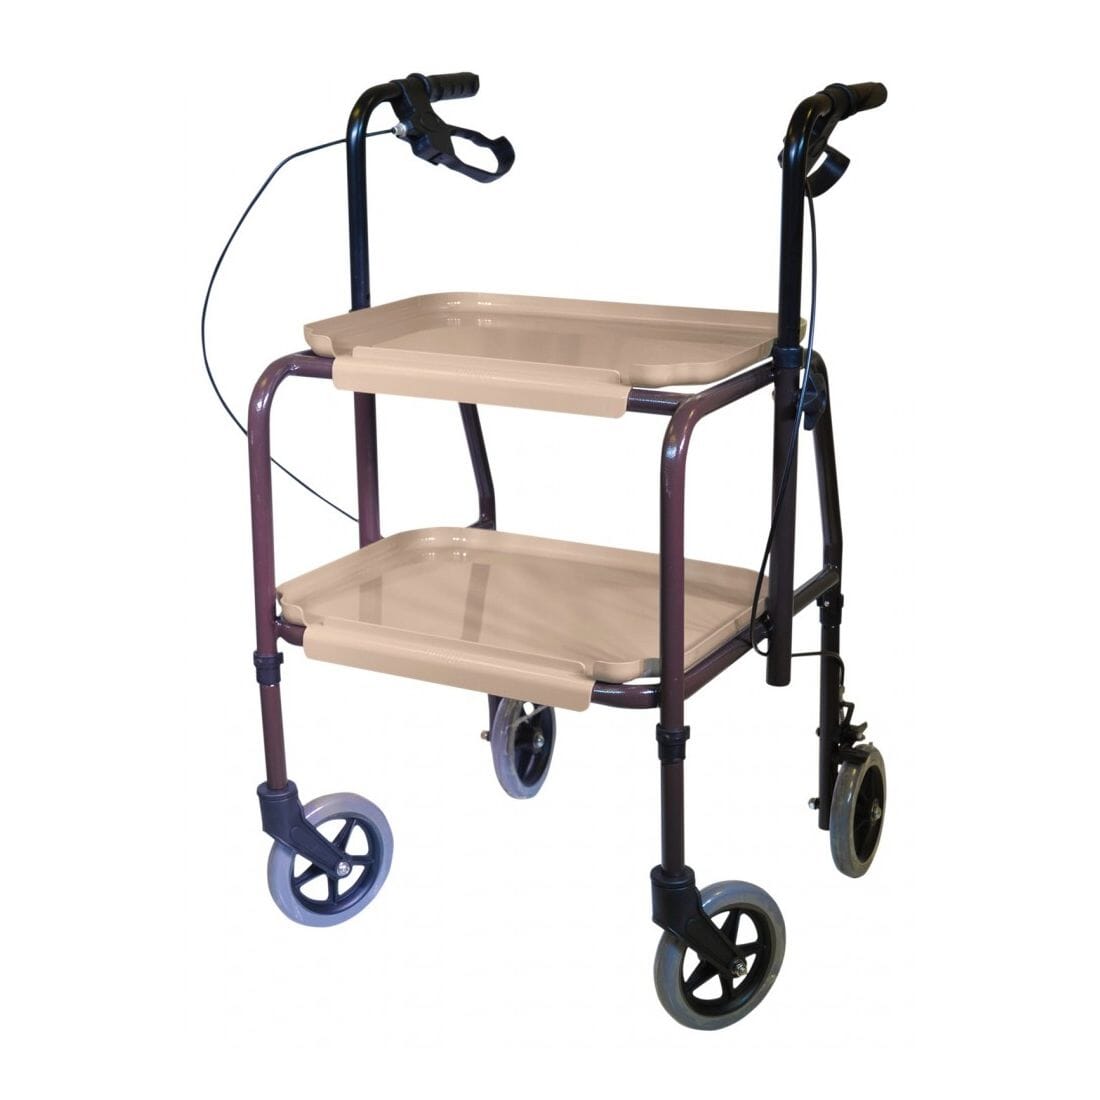 View Height Adjustable Kitchen Strolley Trolley with Brakes information